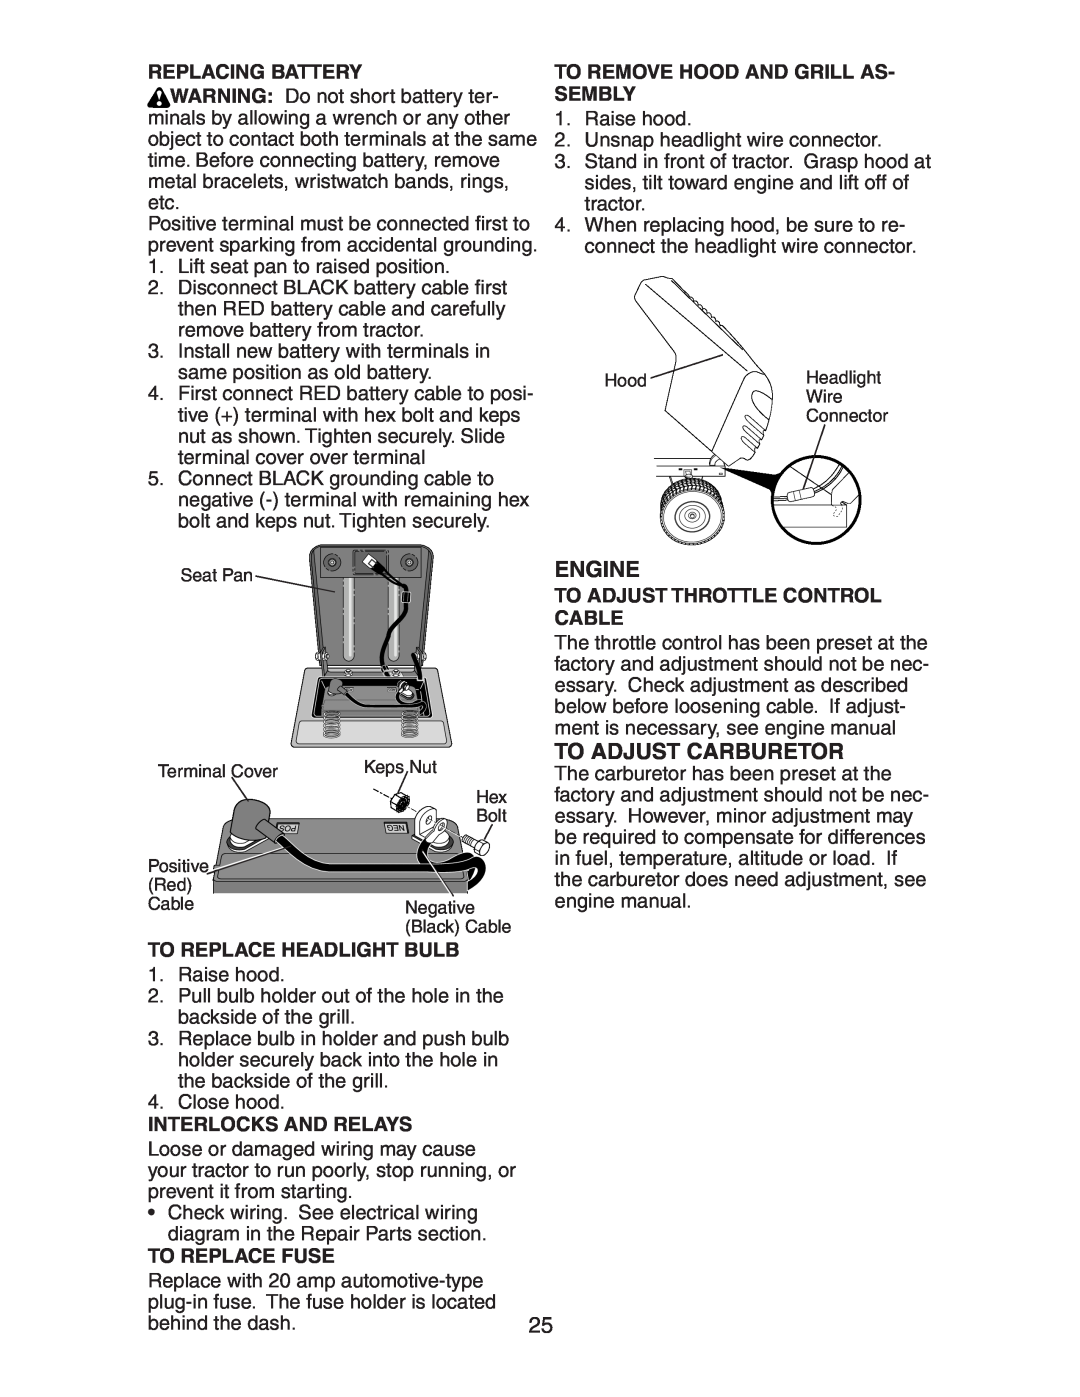 Electrolux AG17542STA manual Replacing Battery, To Remove Hood And Grill As- Sembly, To Adjust Throttle Control Cable 